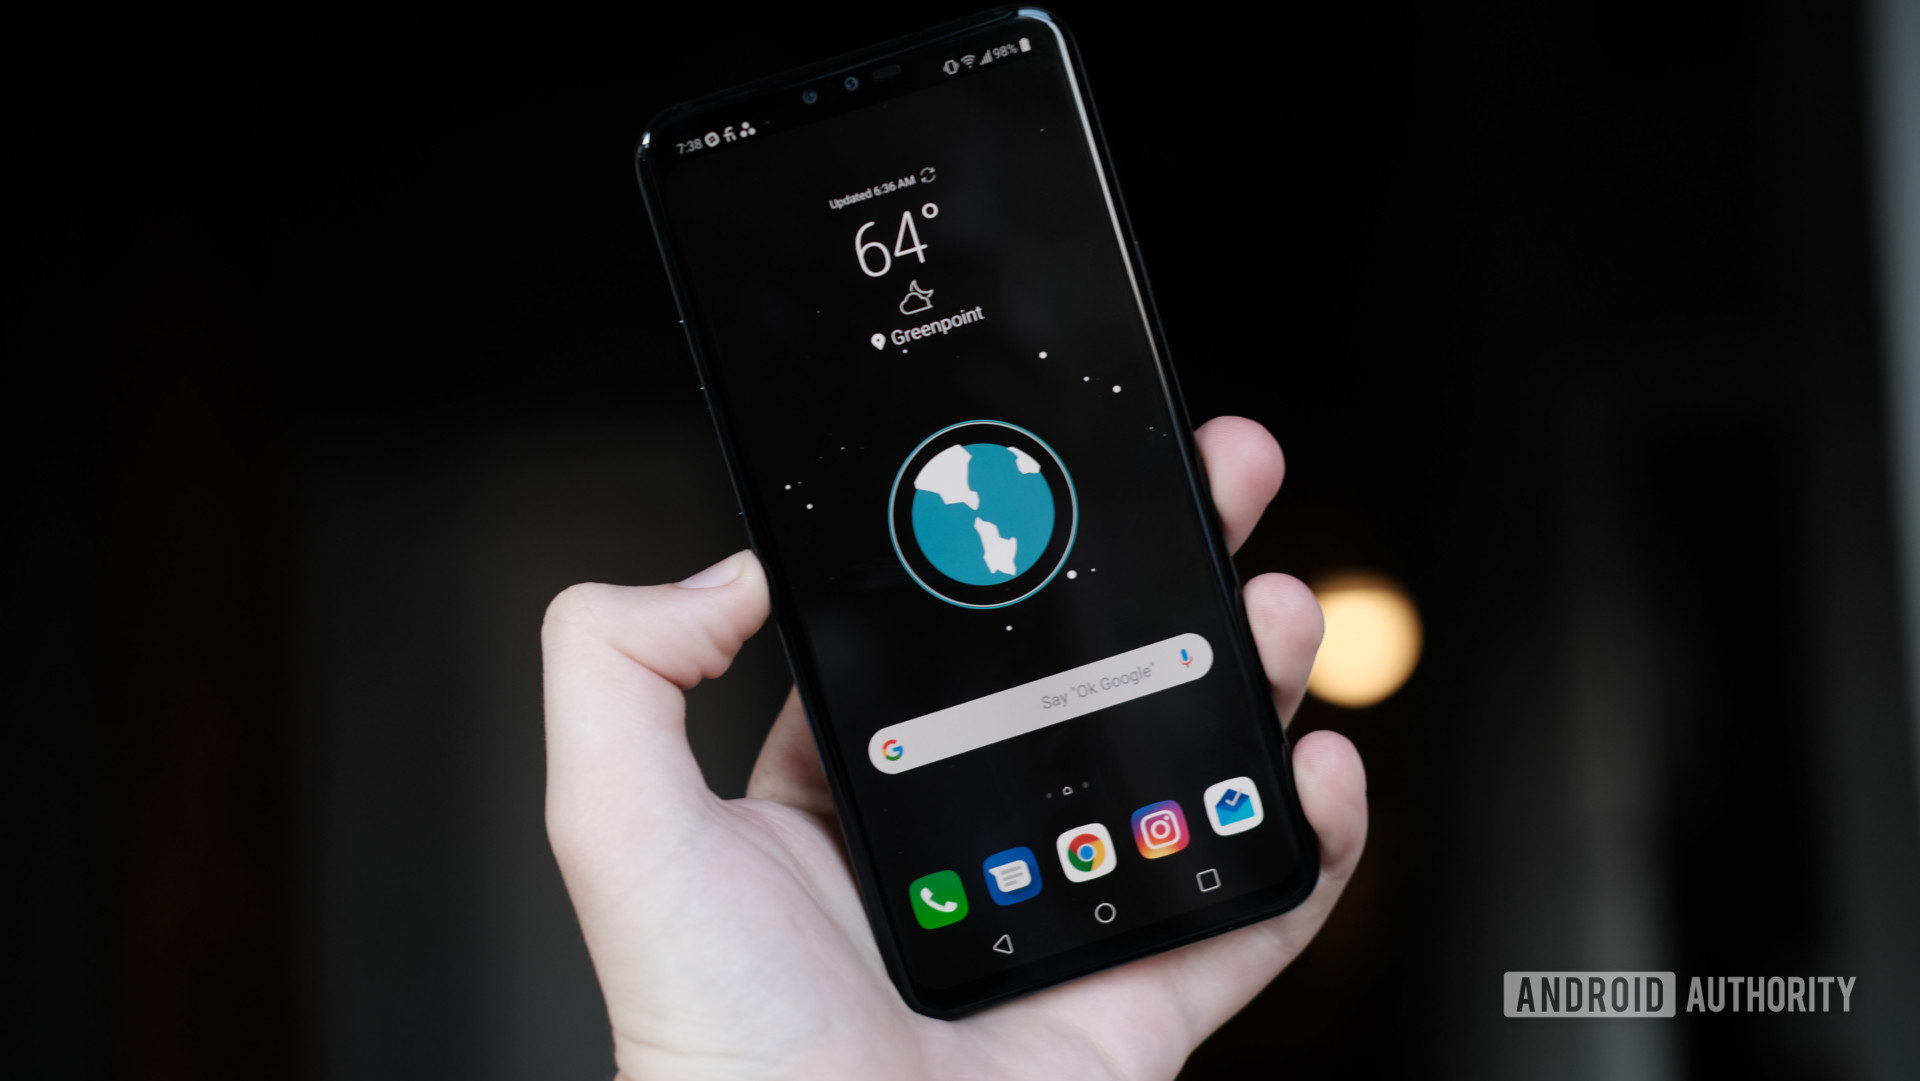 LG V40 ThinQ in hand showing home screen